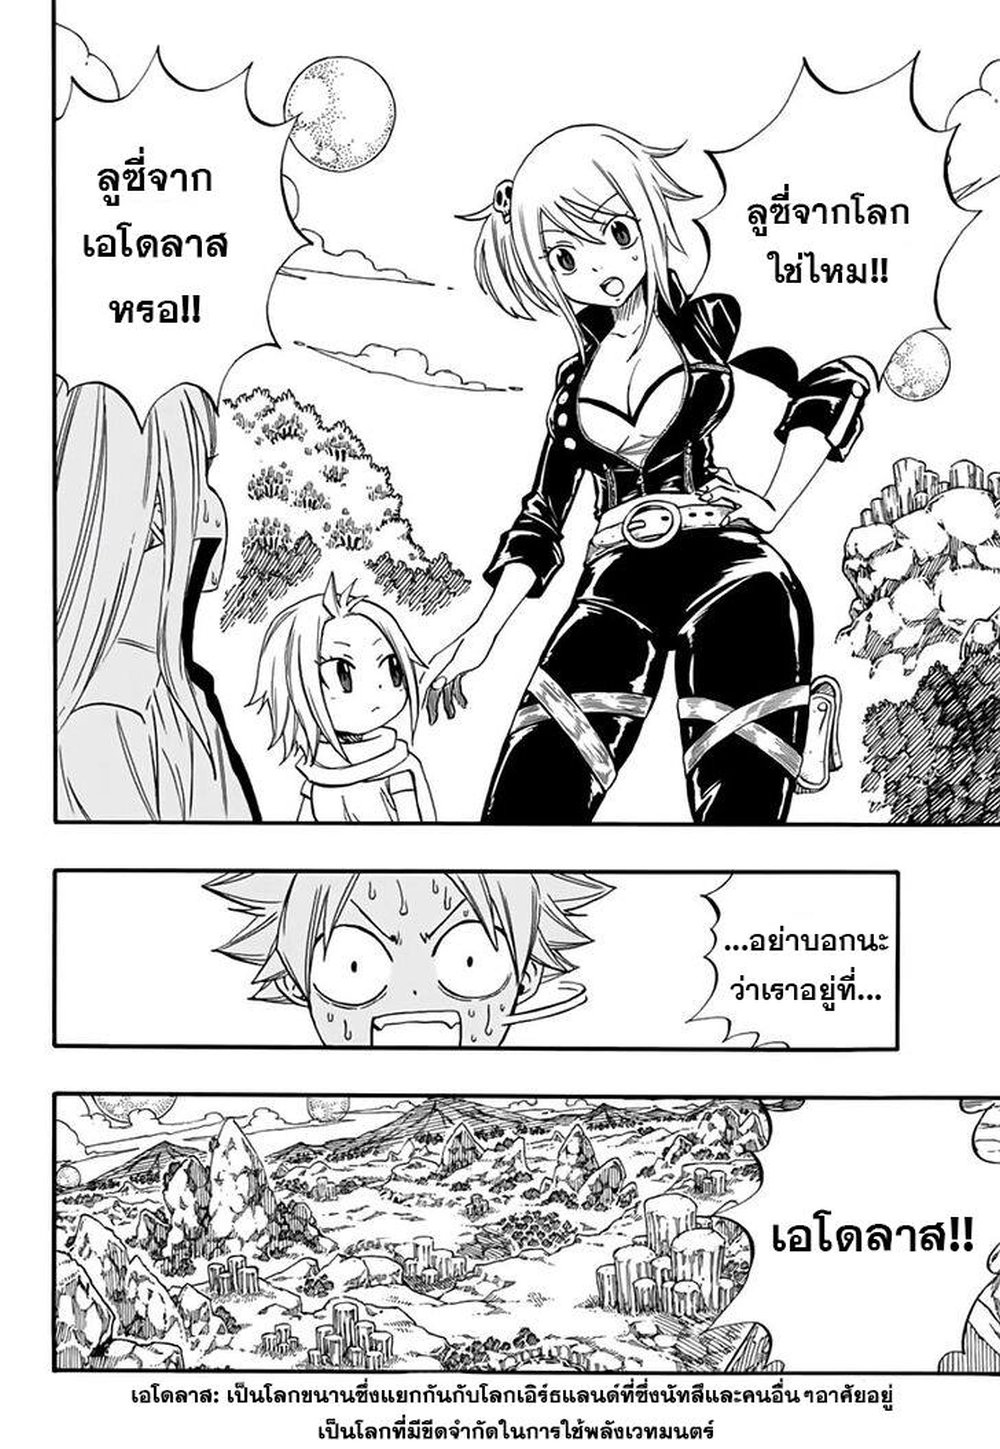 Fairy Tail: 100 Years Quest 65 TH